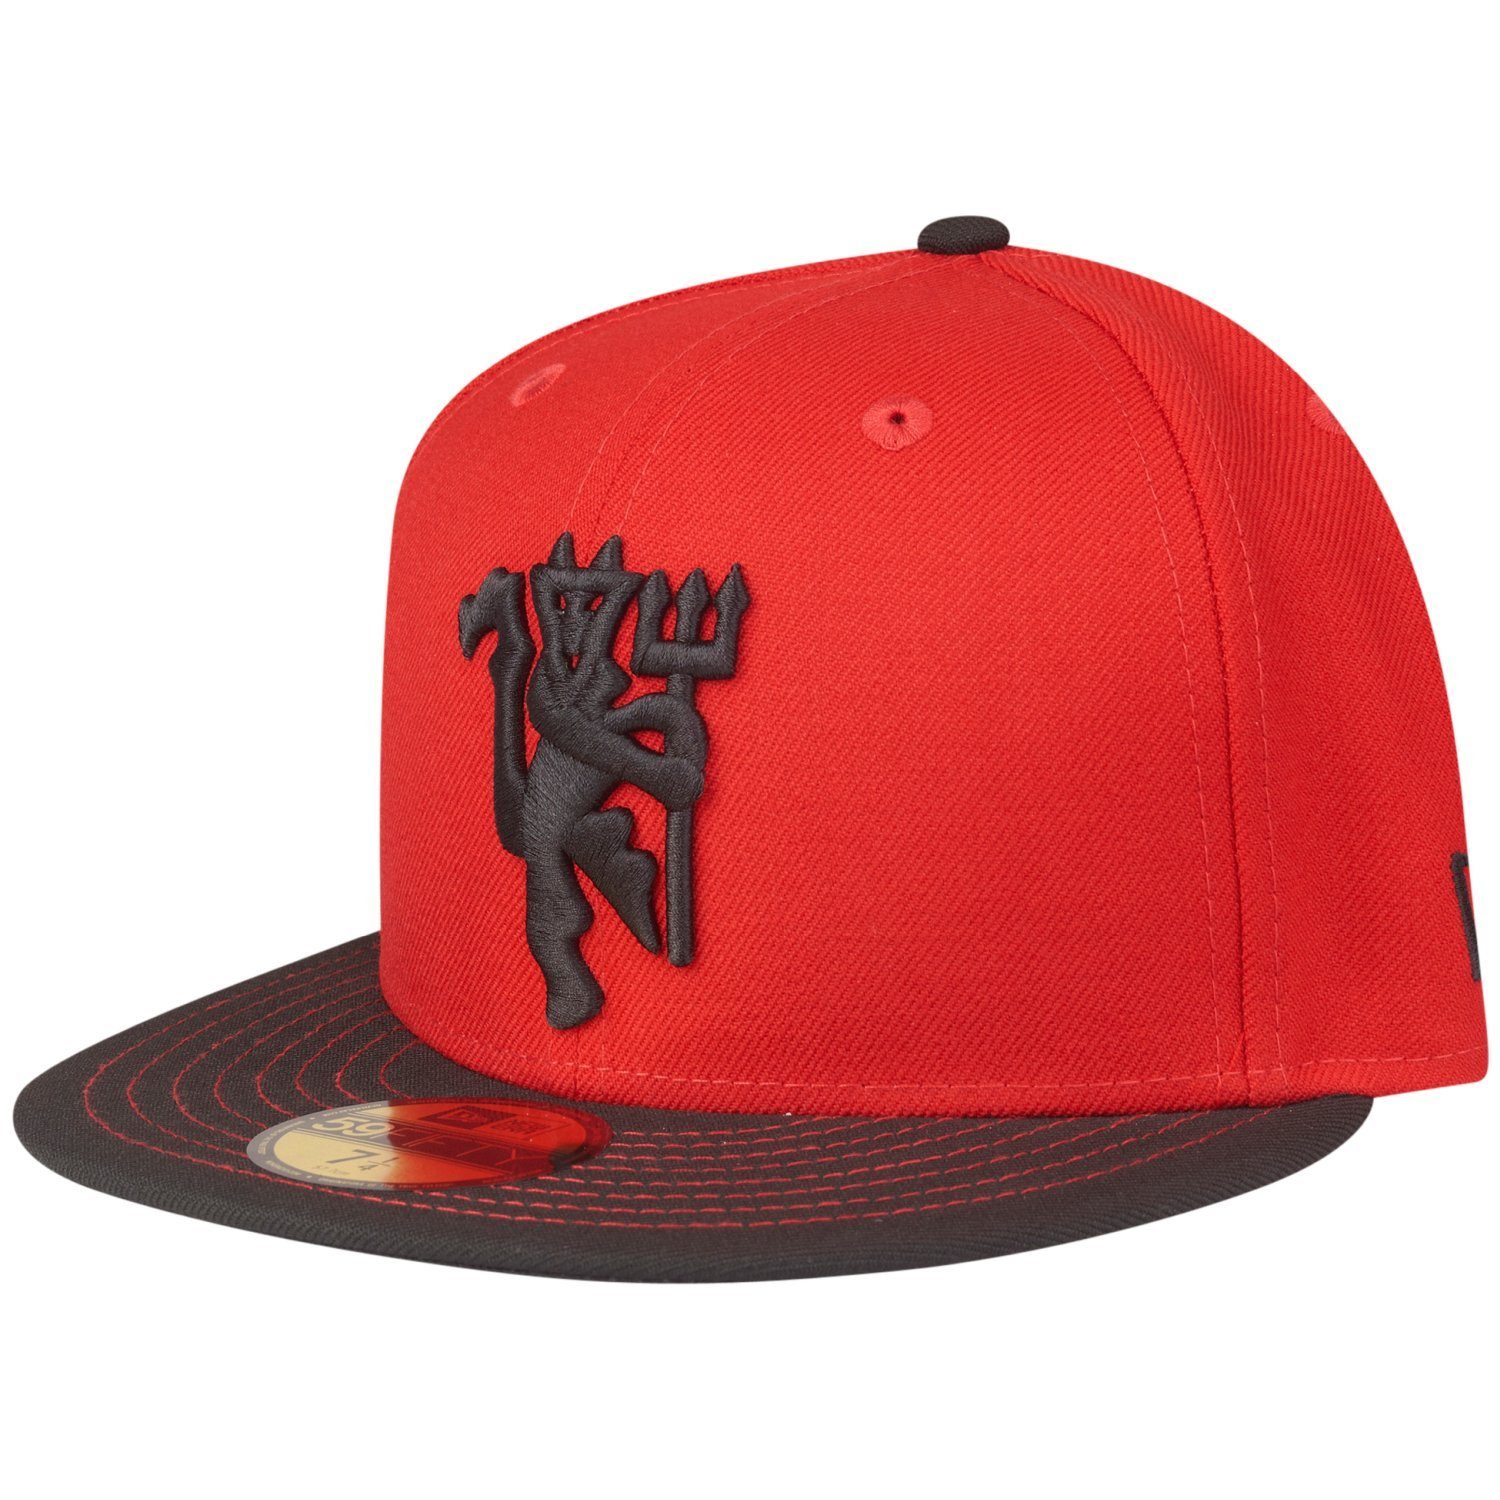 New Era Fitted Cap 59Fifty DEVIL Manchester United